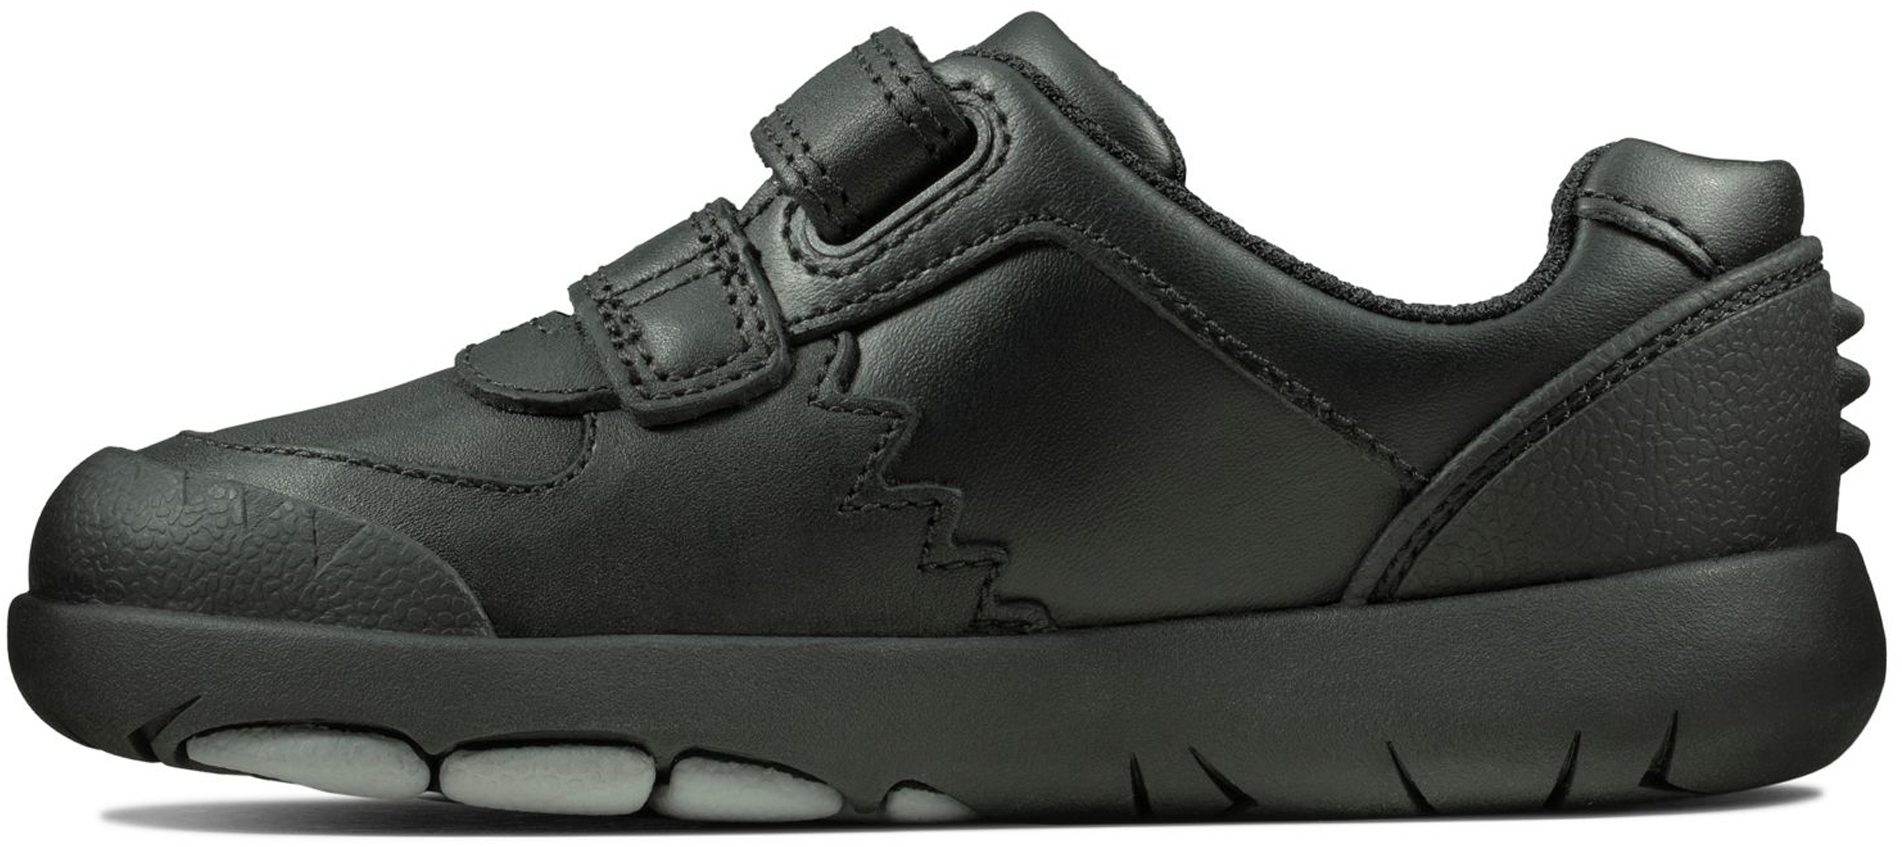 Clarks Rex Pace Toddler Black Leather 26147045 - Boys School Shoes ...